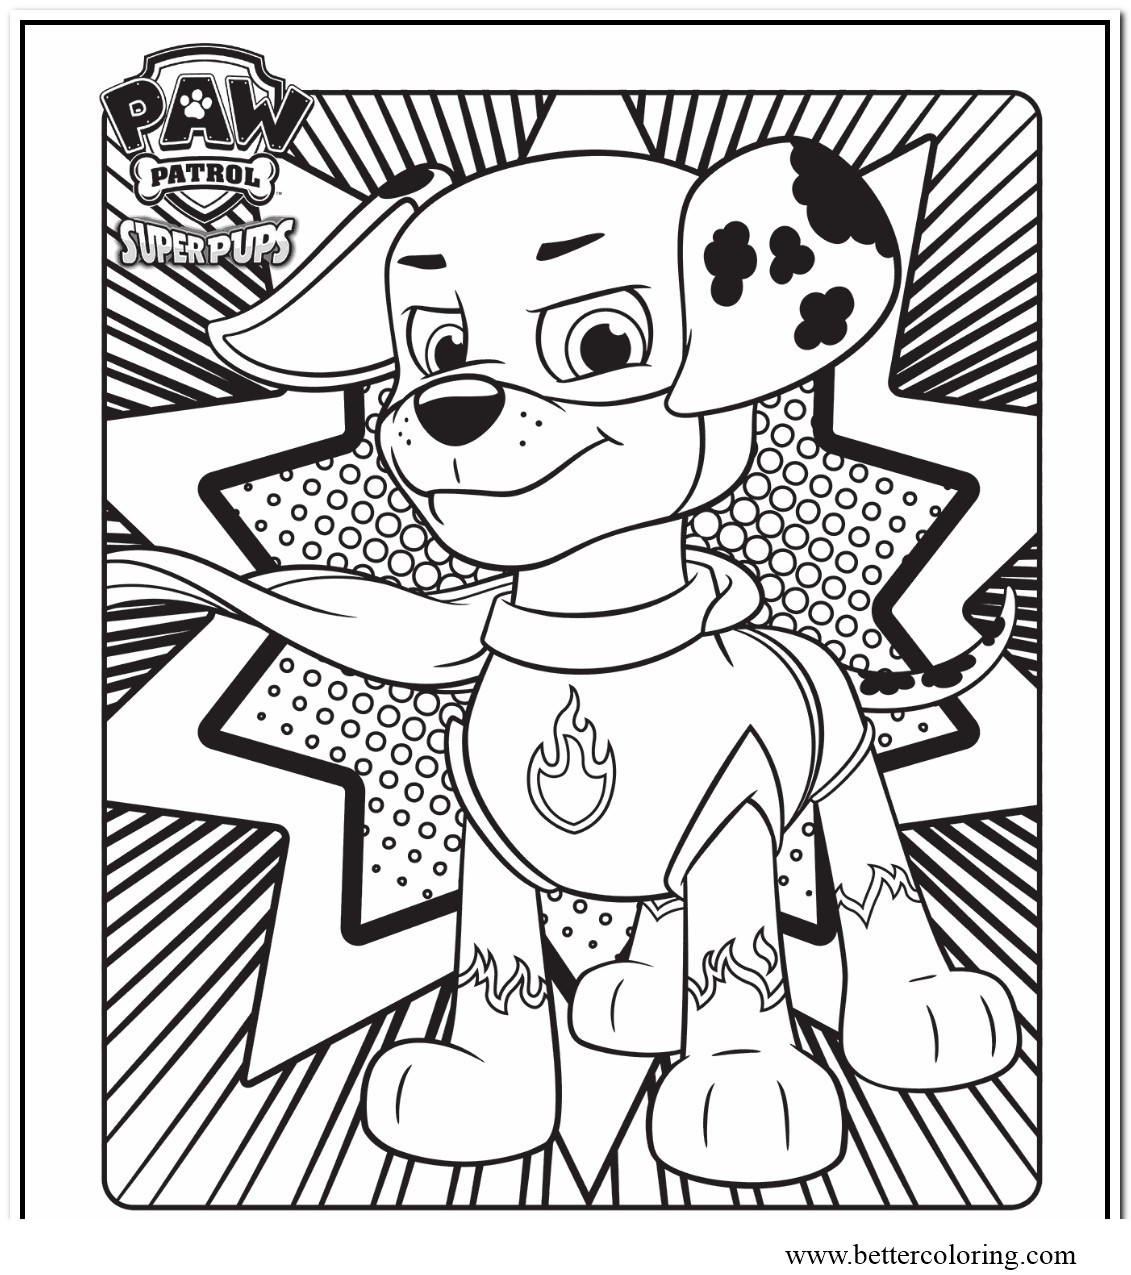 Free Paw Patrol Super Pups Coloring Pages printable